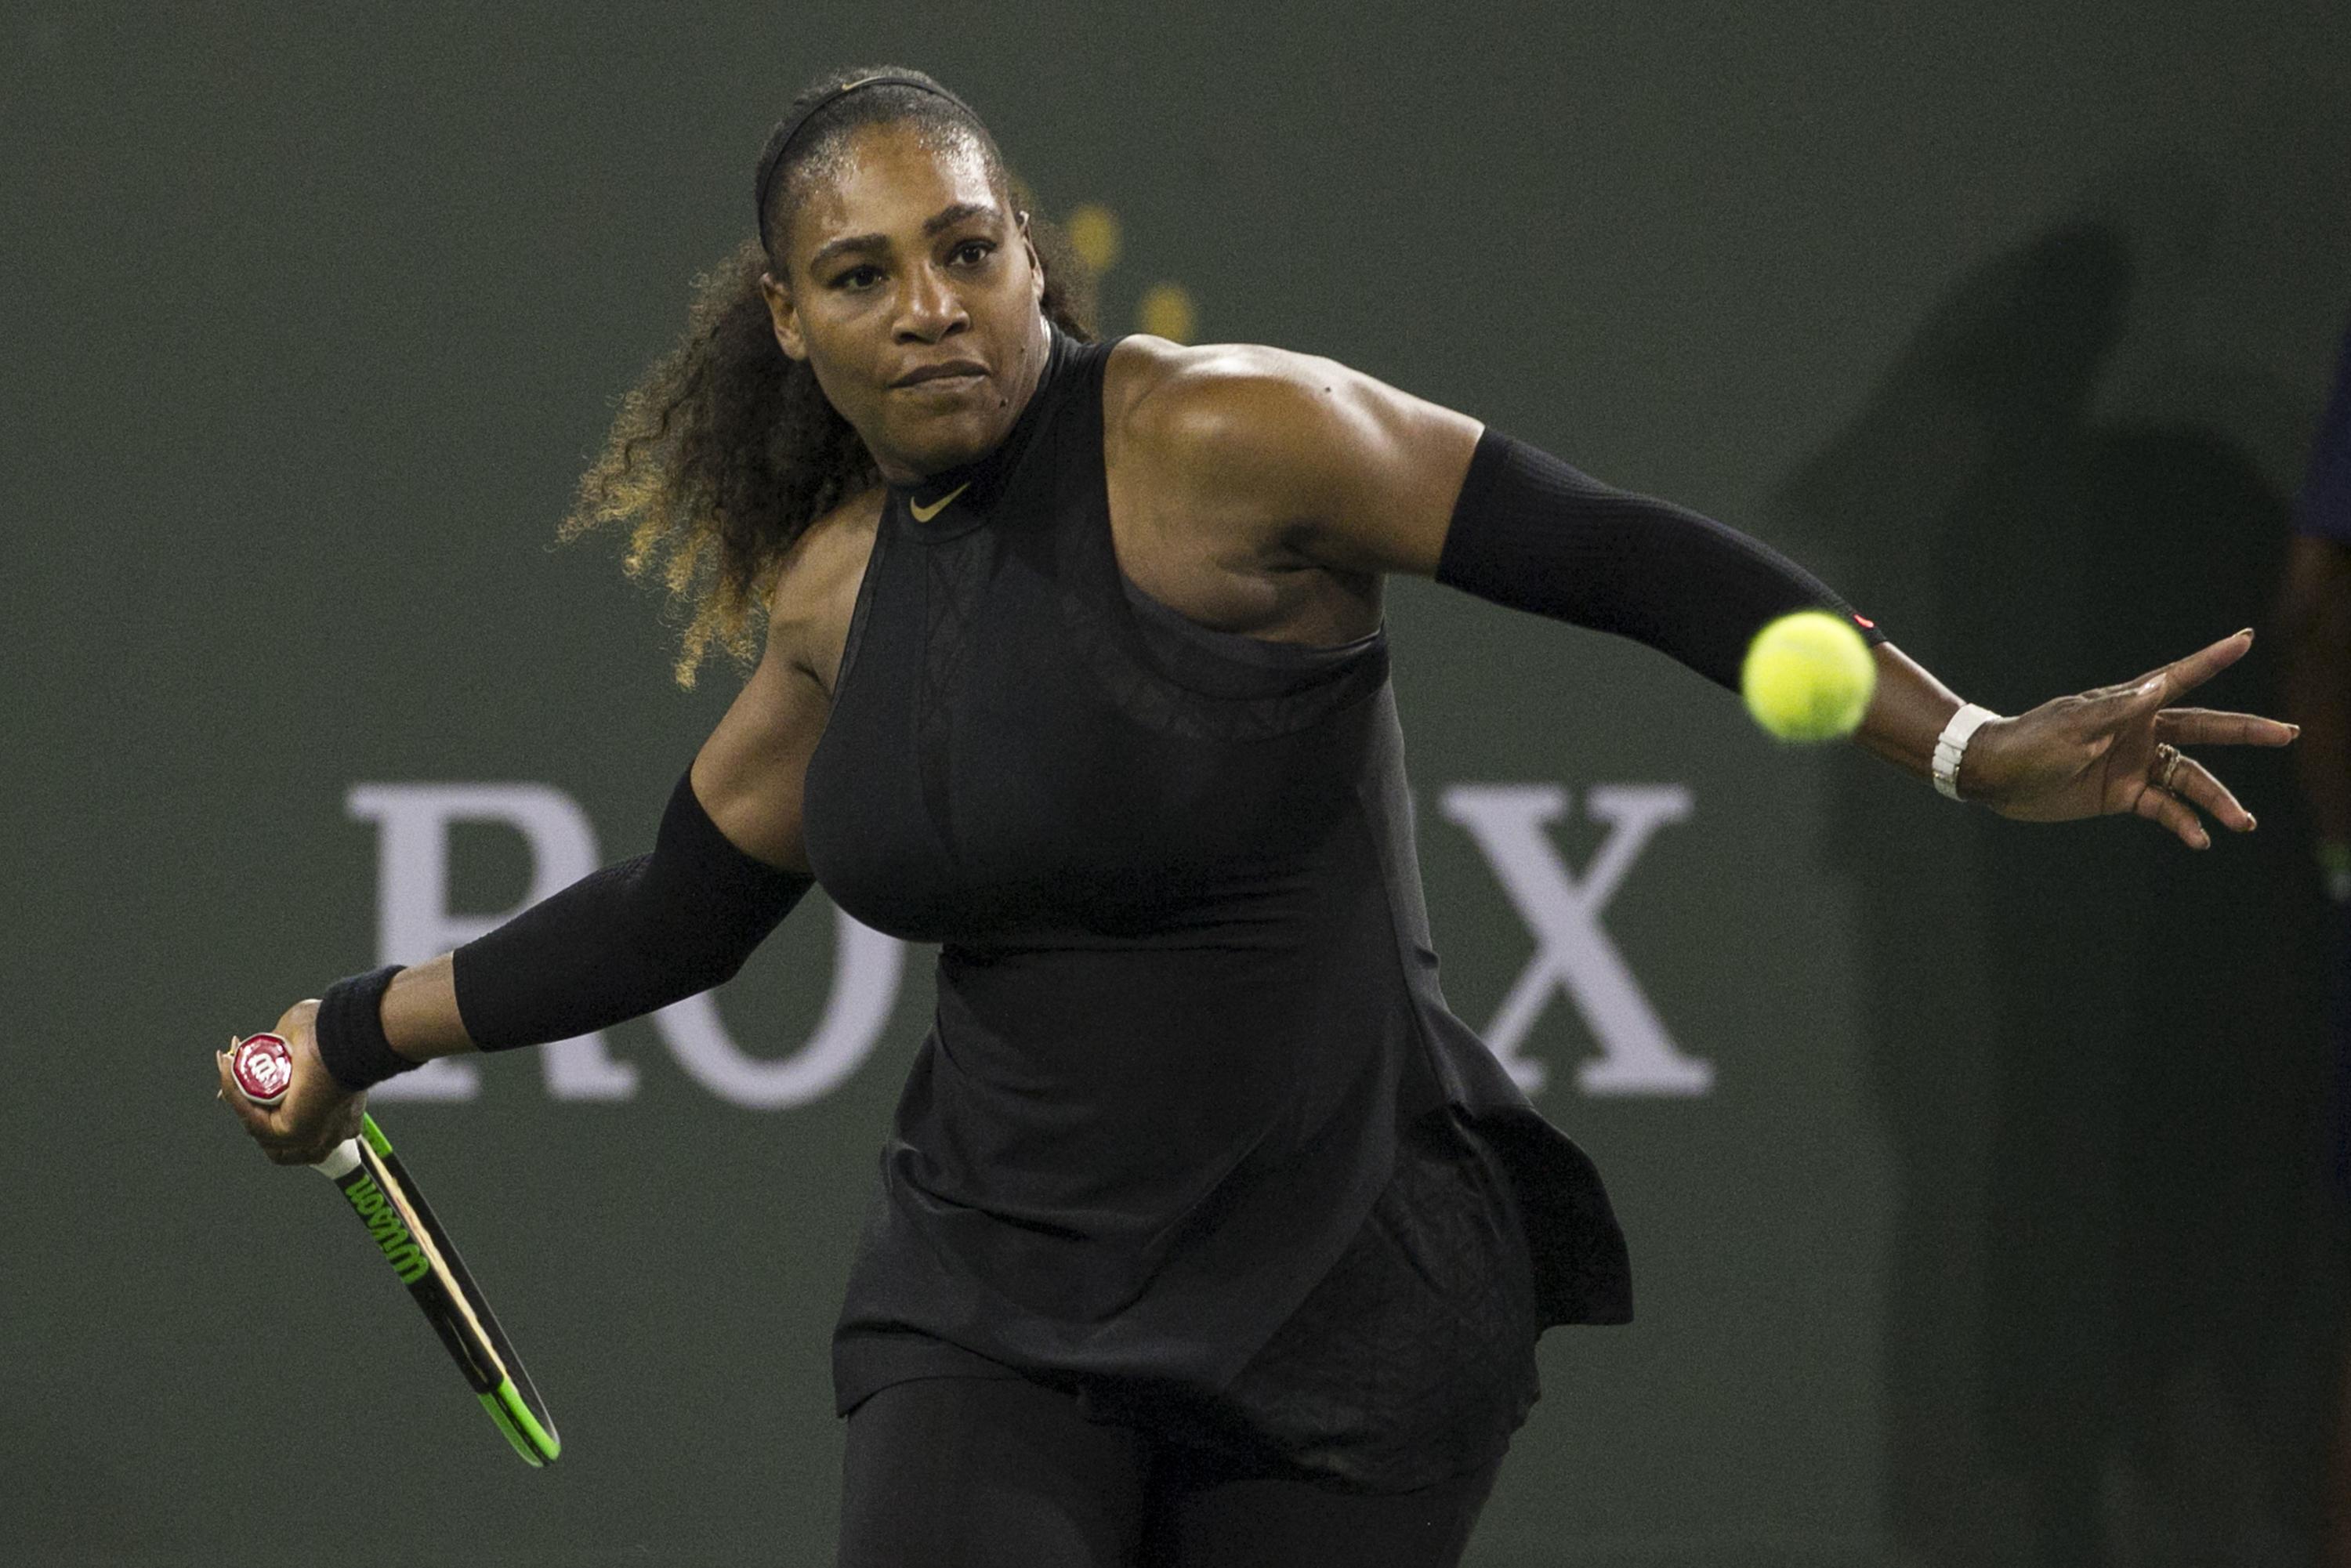 Serena Williams wins 1st match in comeback at Indian Wells | The Spokesman-Review